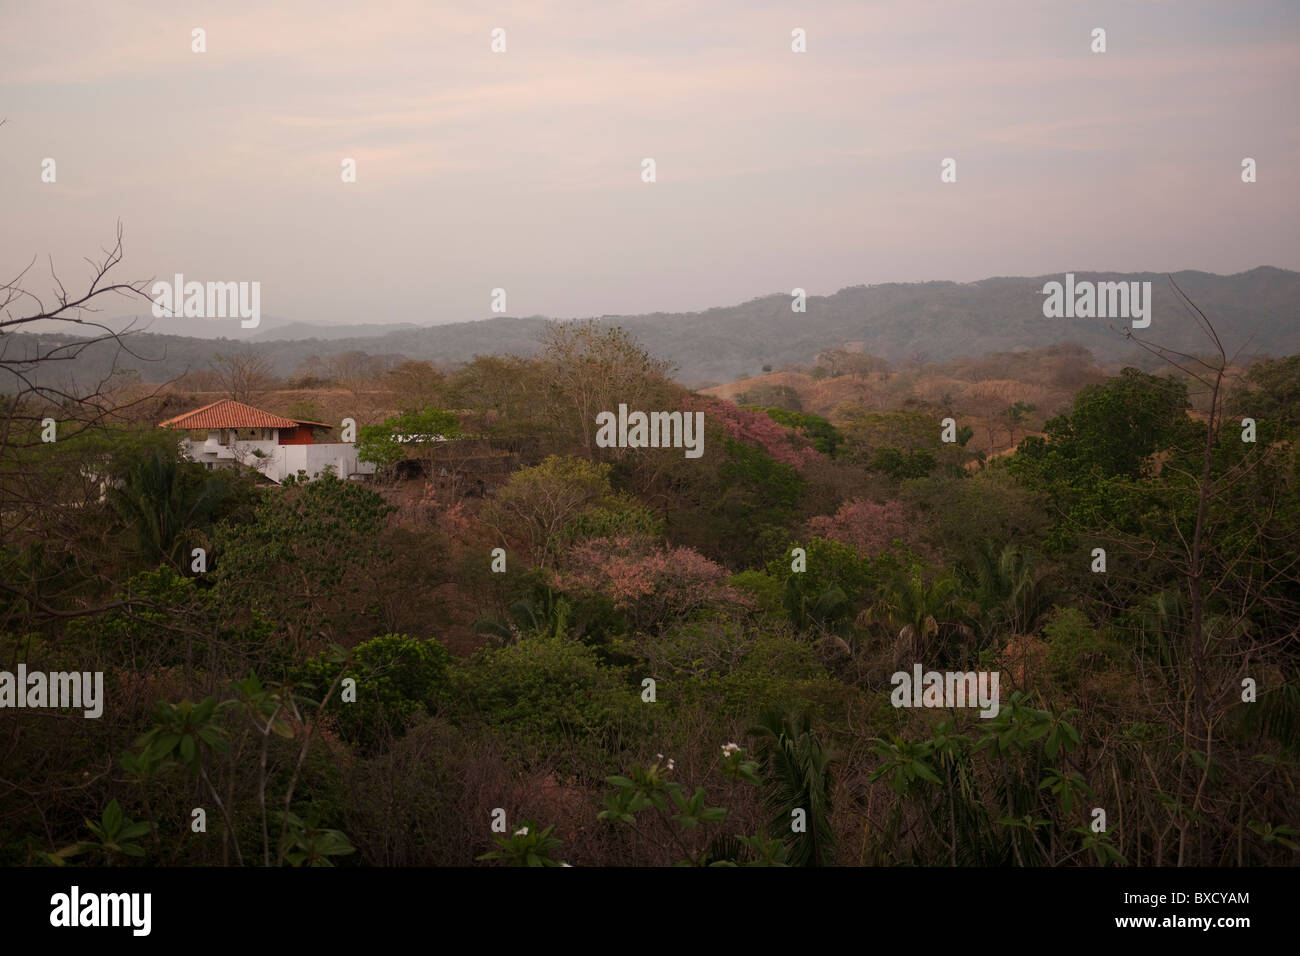 Sun fading over a white house with an orange roof in the rolling hills above the treetops of Costa Rica Stock Photo